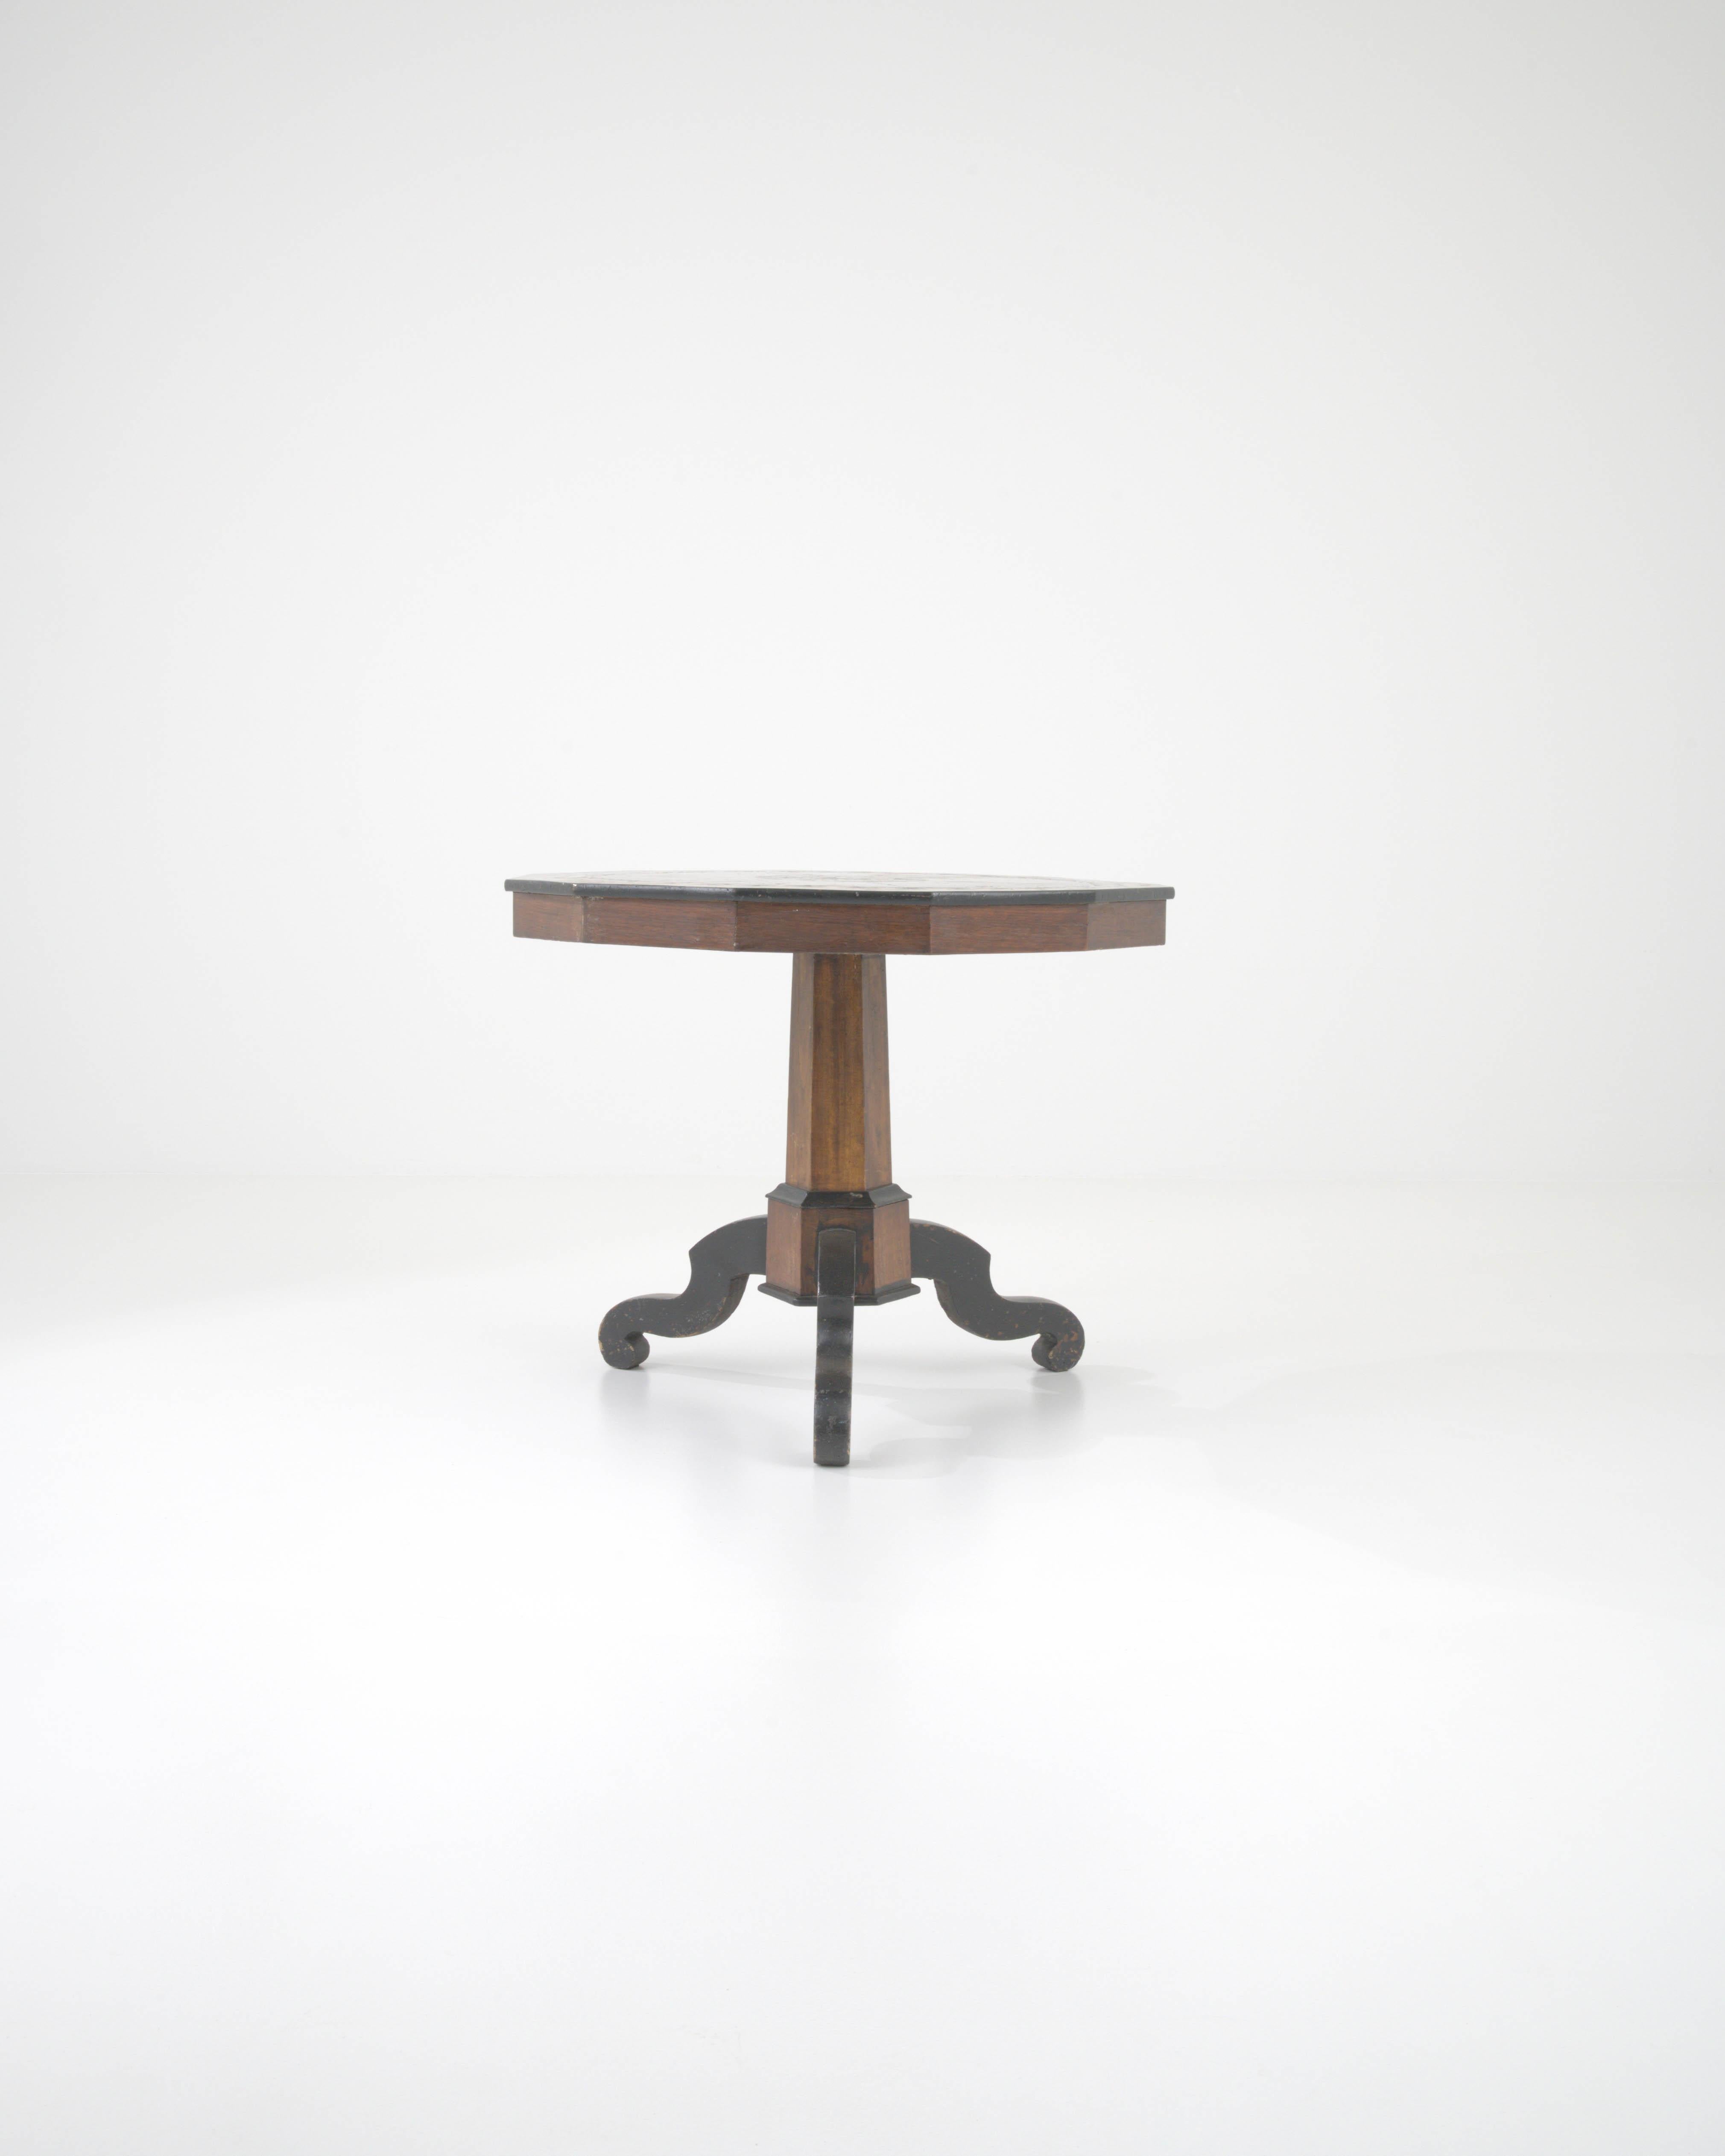 Transport yourself to the elegance of the 19th century with this French Wooden Side Table boasting its original rich walnut stain patina. The unique design features black legs that complement the dark patina, providing a striking contrast. The top